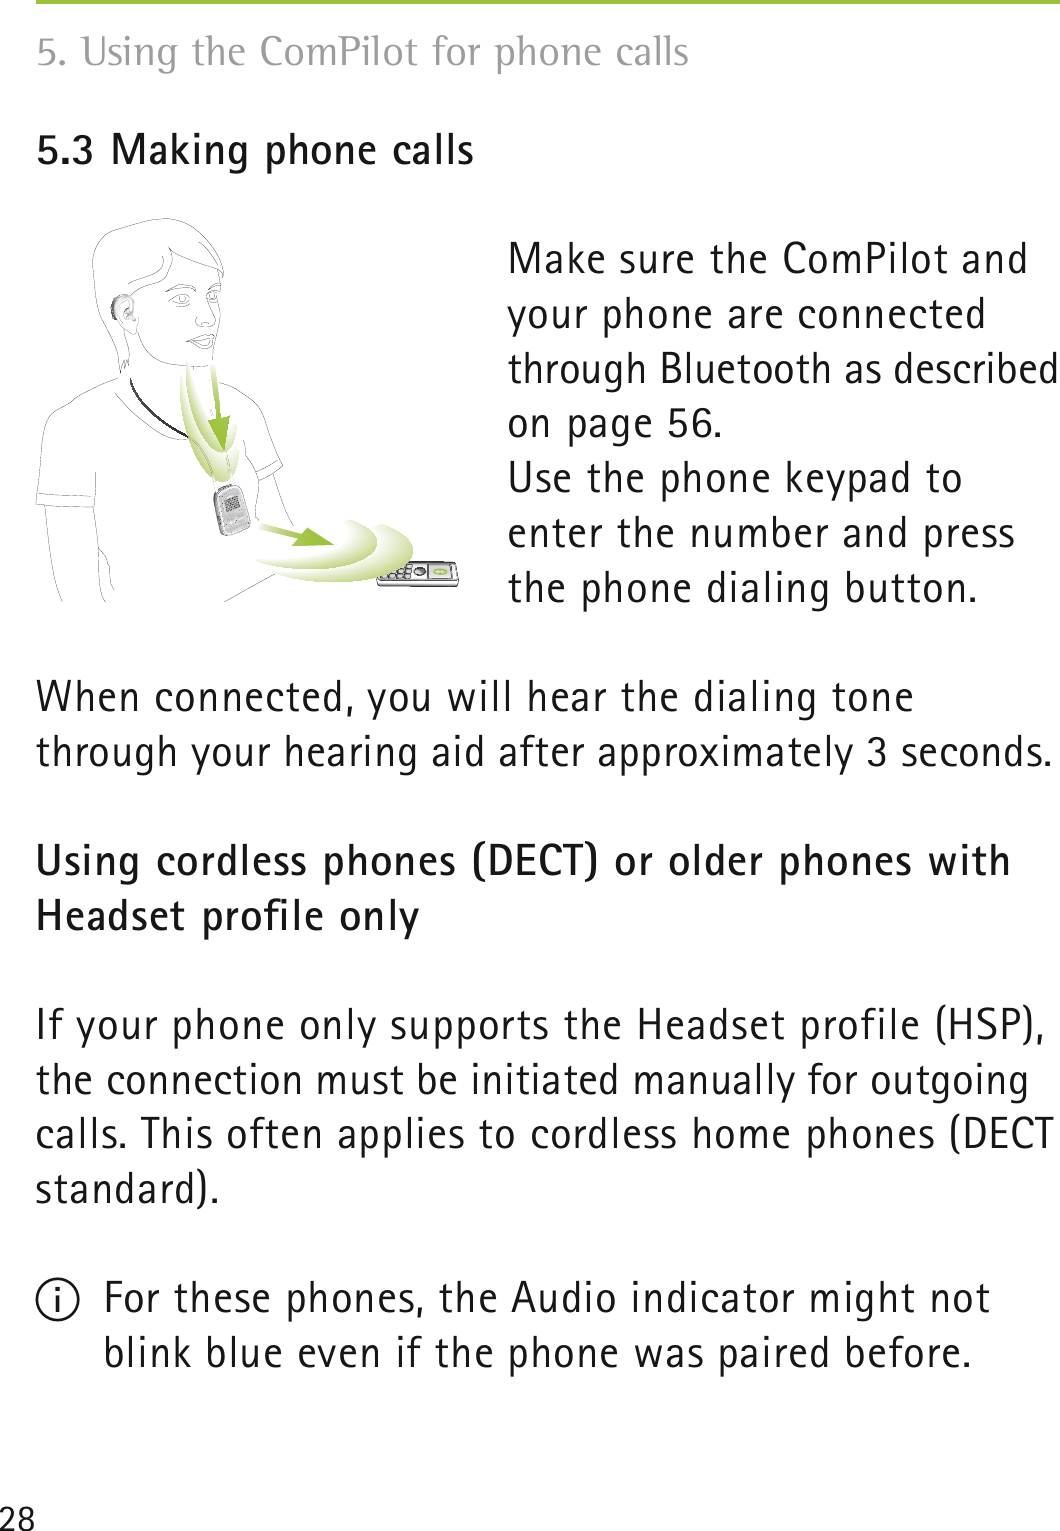 285.3 Making phone calls Make sure the ComPilot and your phone are connected through Bluetooth as described on page 56.Use the phone keypad to enter the number and press the phone dialing button.When connected, you will hear the dialing tone through your hearing aid after approximately 3 seconds.Using cordless phones (DECT) or older phones with Headset proﬁle onlyIf your phone only supports the Headset profile (HSP), the connection must be initiated manually for outgoing calls. This often applies to cordless home phones (DECT standard).I  For these phones, the Audio indicator might not blink blue even if the phone was paired before.5. Using the ComPilot for phone calls poweraudio